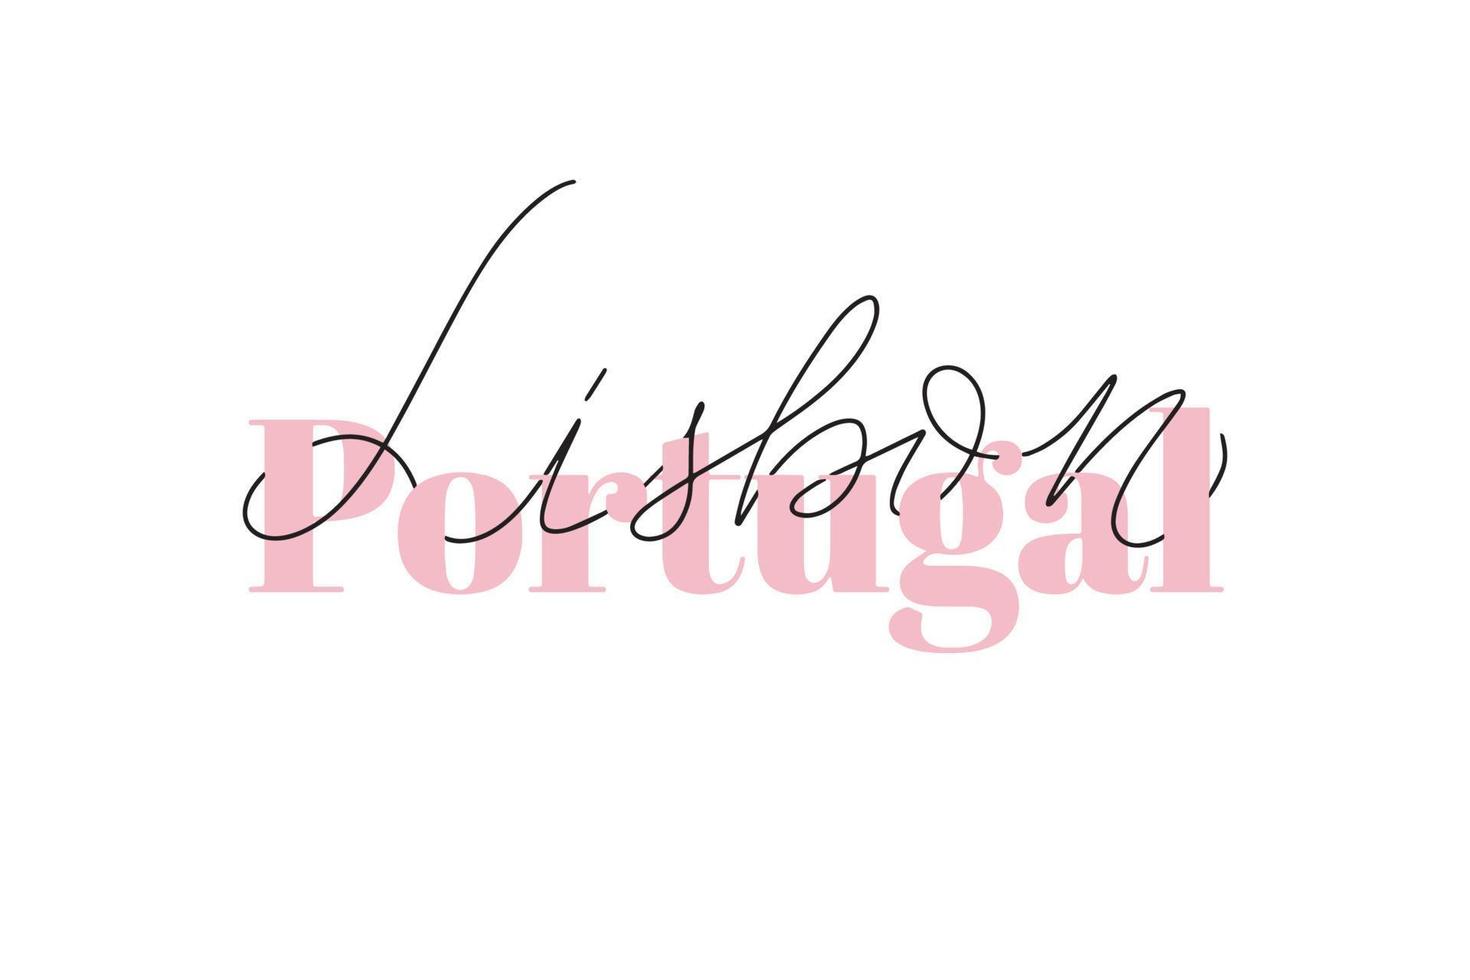 Inspirational handwritten brush lettering Portugal Lisbon. Vector calligraphy illustration isolated on white background. Typography for banners, badges, postcard, tshirt, prints, posters.